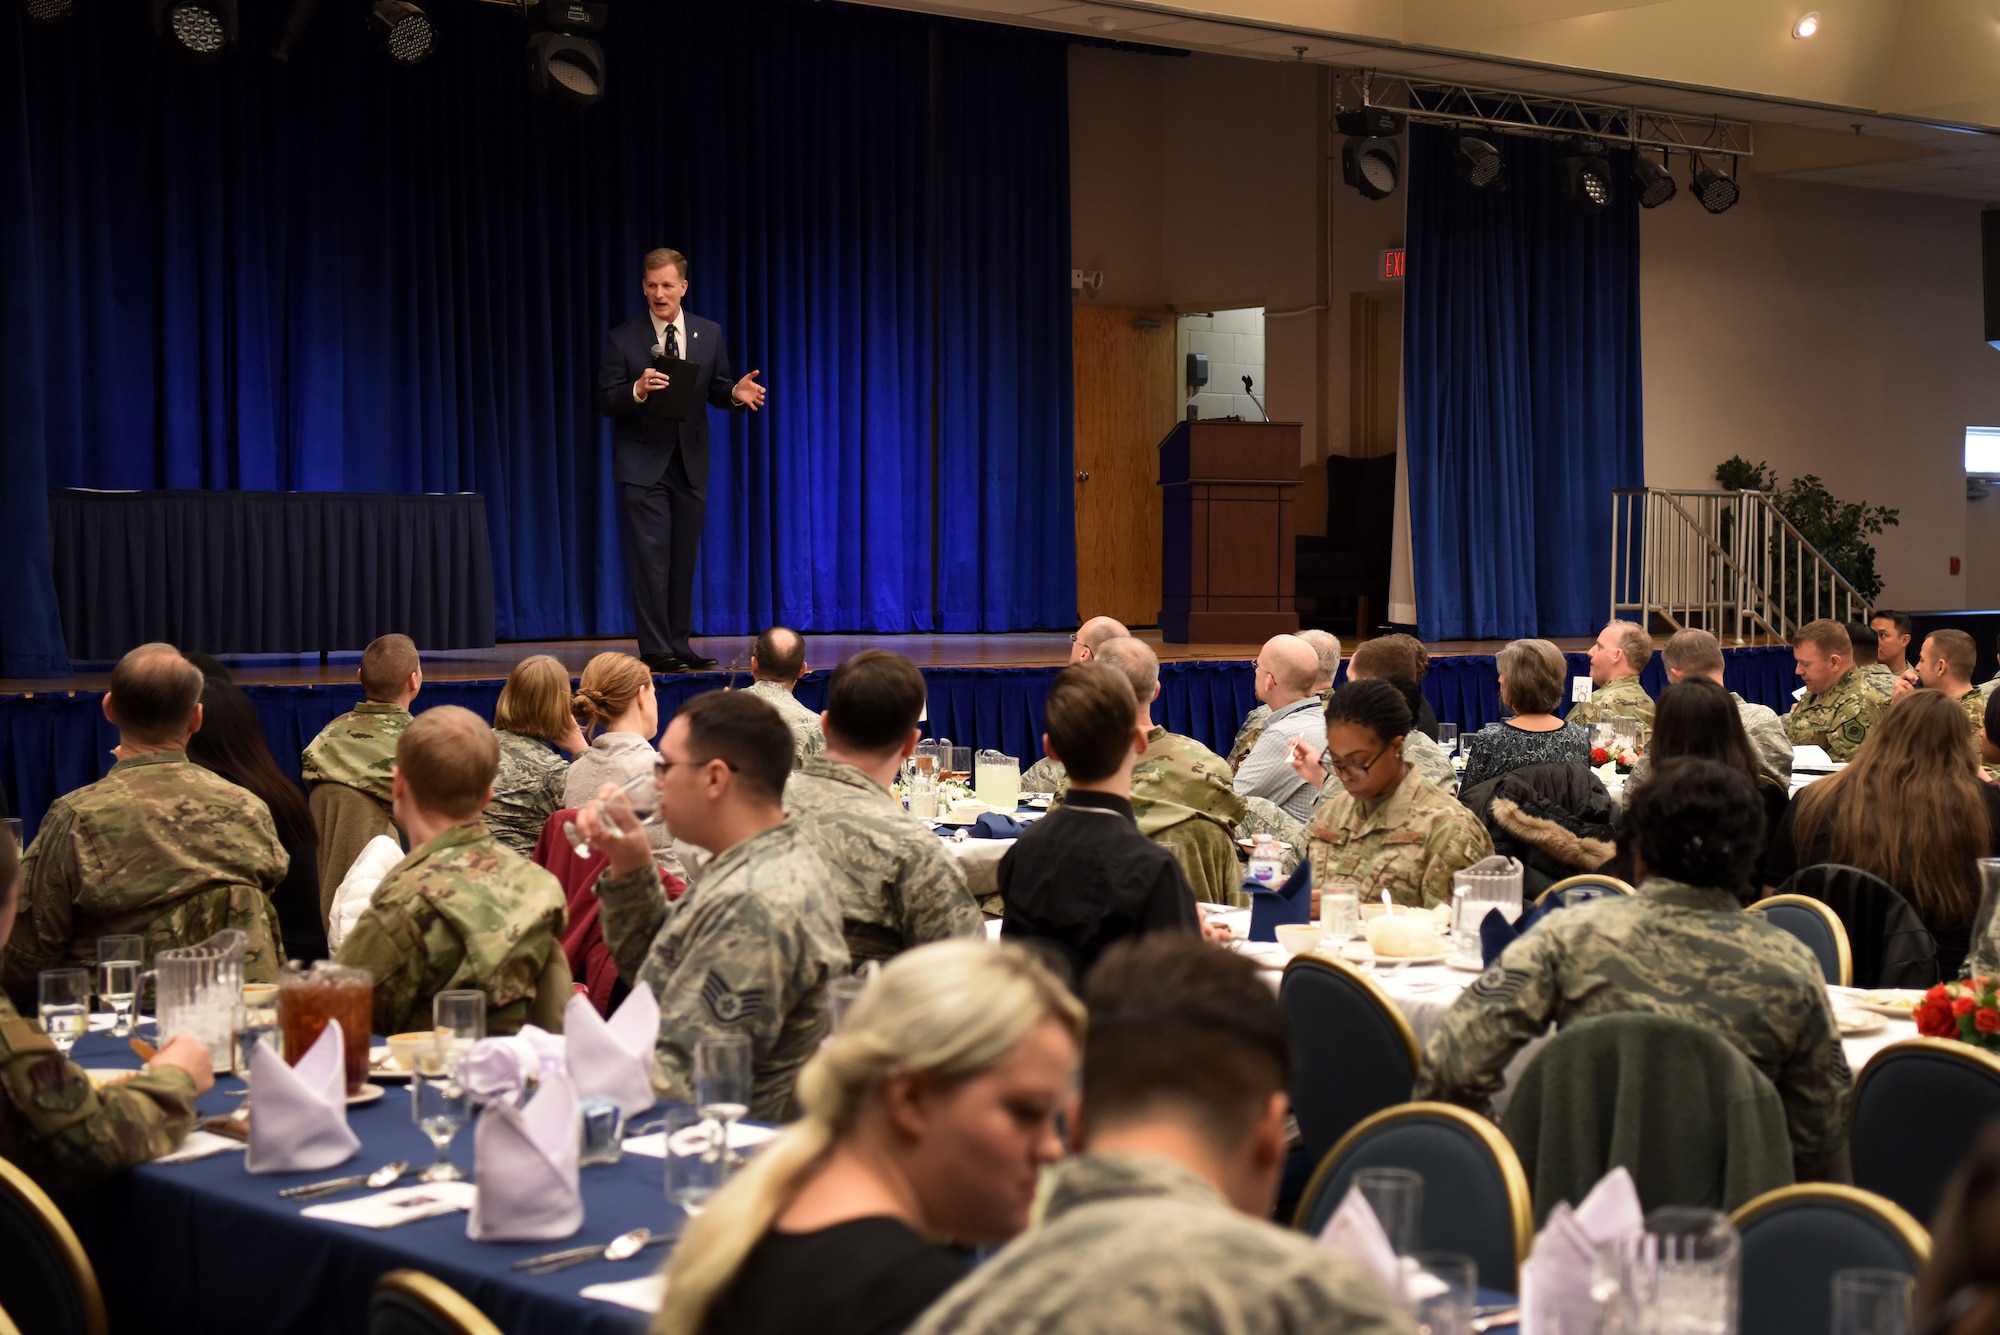 U.S. Air Force retired Maj. Gen. Dondi Costin, prior Air Force Chief of Chaplains, speaks to attendees at a resiliency luncheon held by the 51st Fighter Wing Chaplain Corps at Osan Air Base, Republic of Korea, Feb. 21, 2019. Costin now serves as the third president of Charleston Southern University, Charleston, South Carolina. (U.S. Air Force photo by Senior Airman Kelsey Tucker)